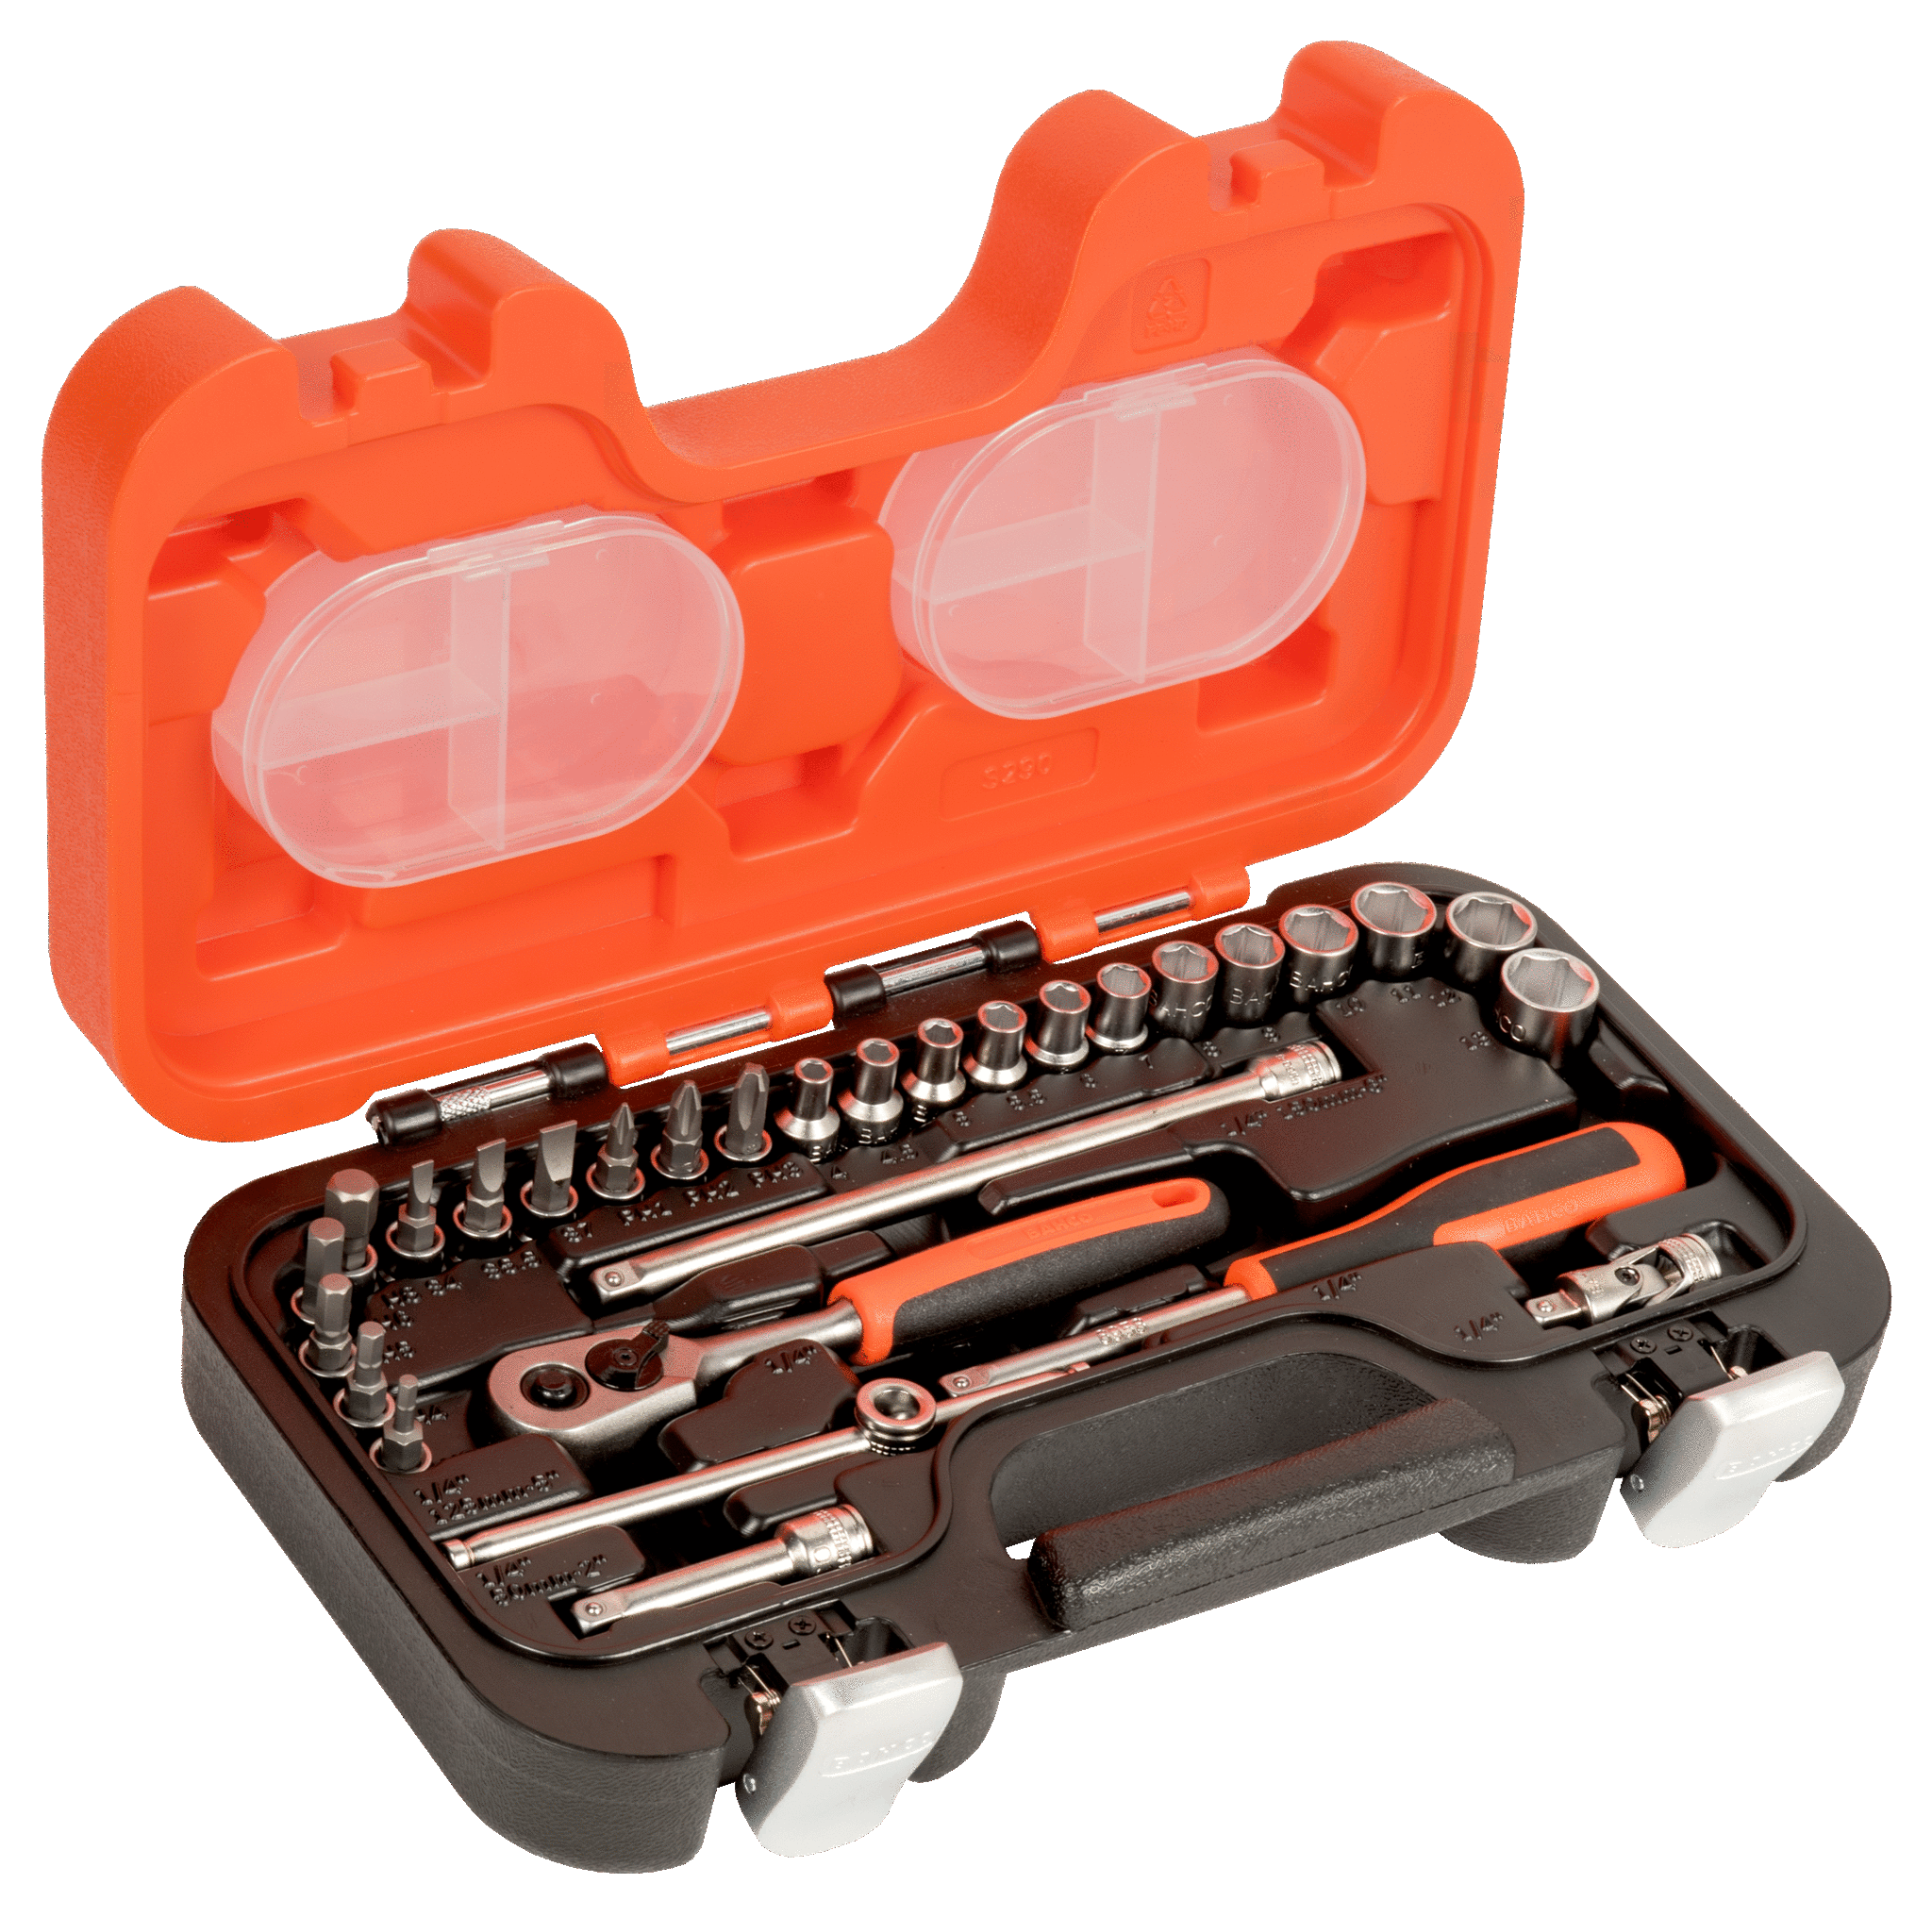 Aexit 2 Pcs Wrenches Vehicle M8 Triple Square Head Screwdriver 1/2 Drive Socket Wrenches Socket Kit 